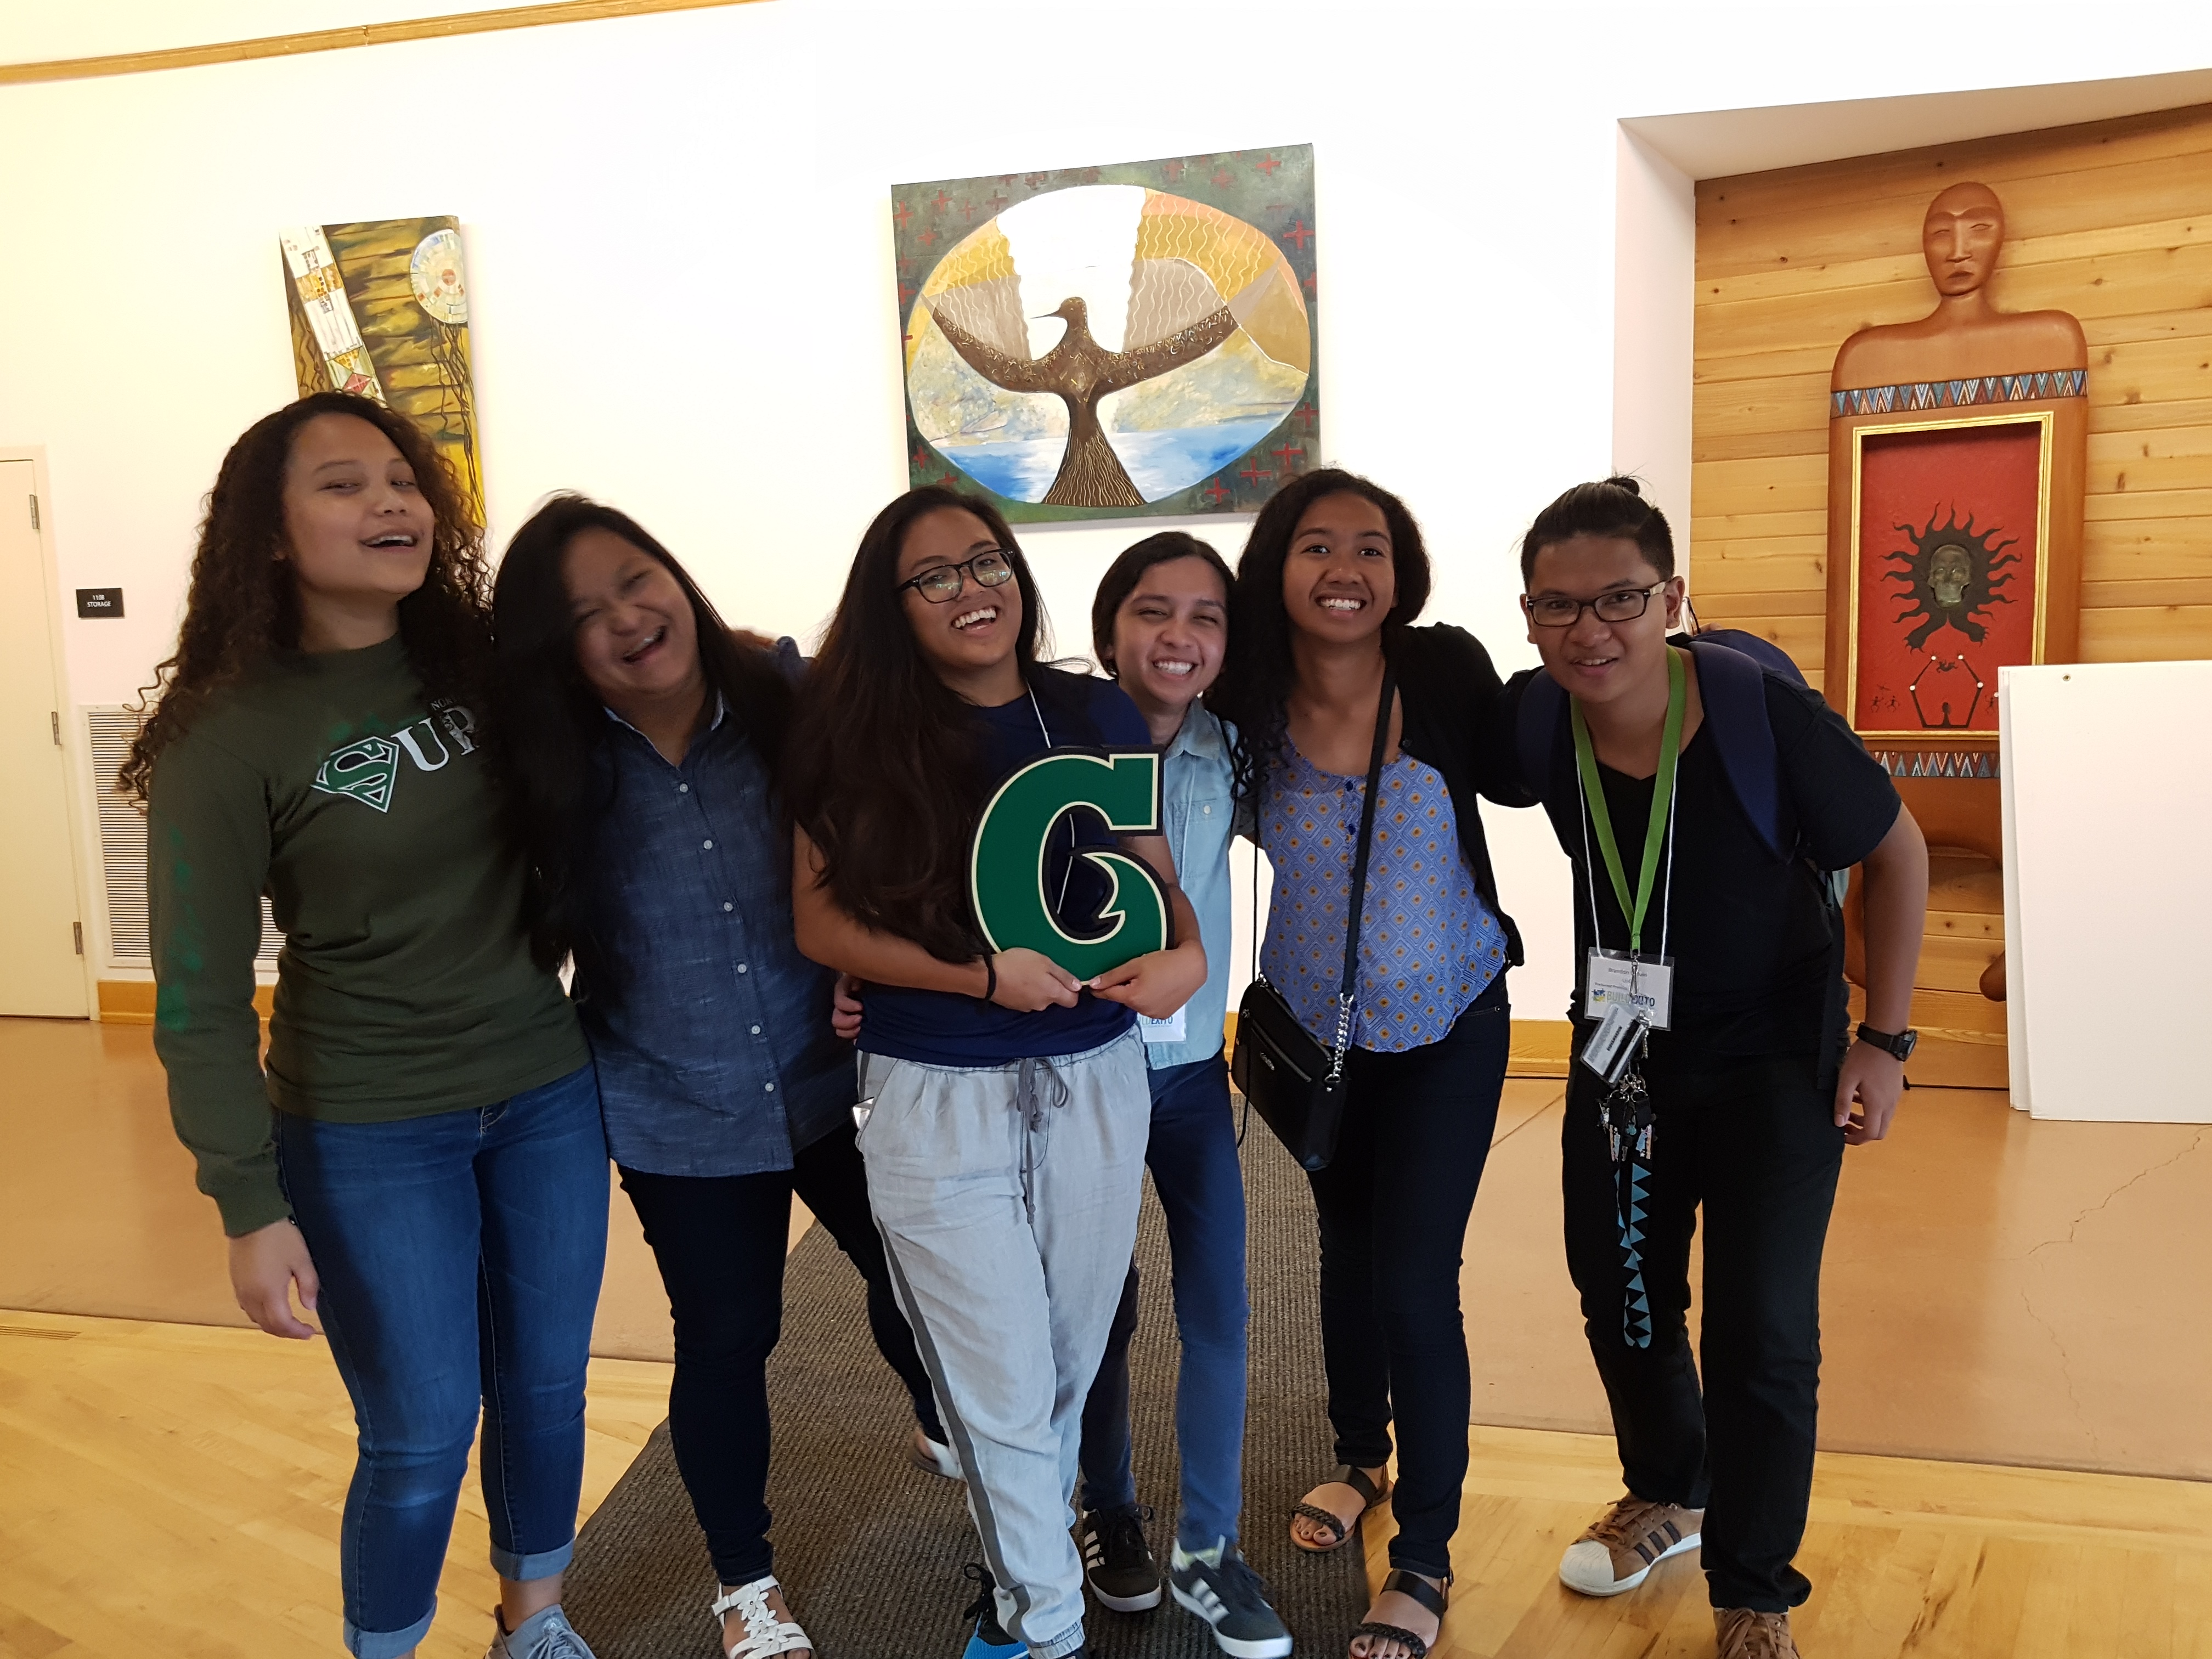 A group of students from the University of Guam poses together, holding a printed University of Guam logo in the middle.